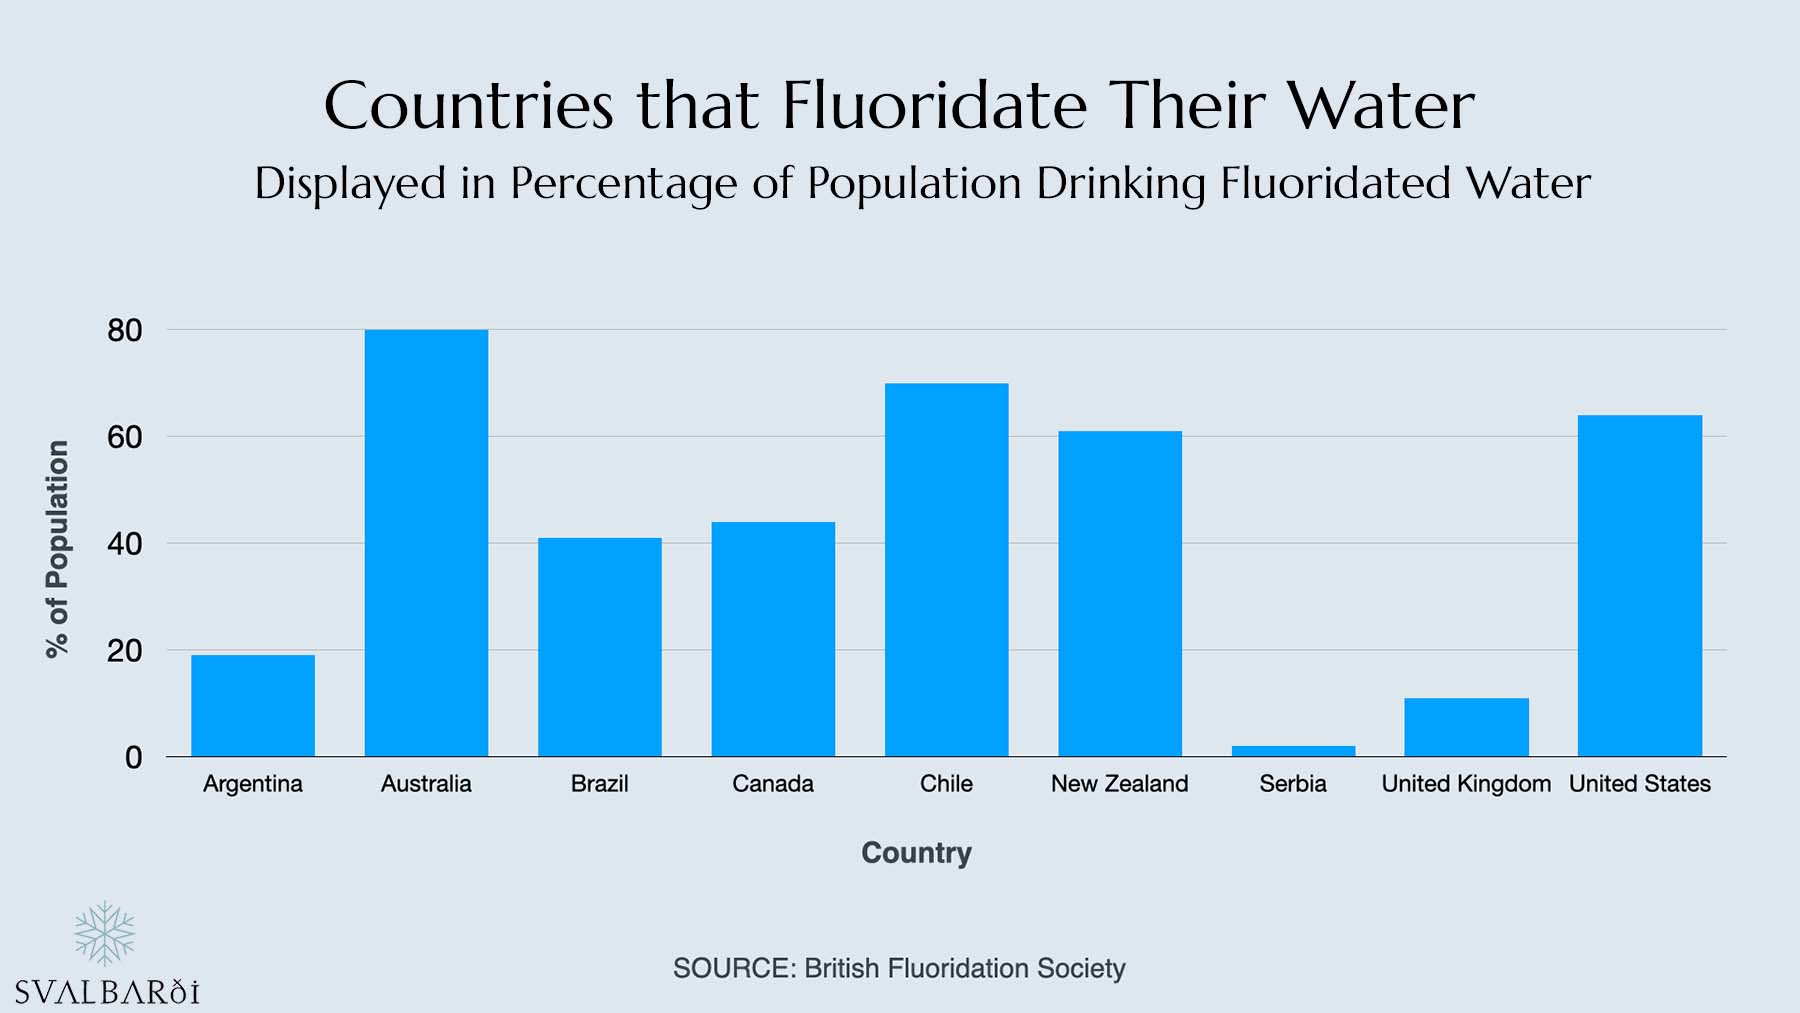 Countries that Fluoridate their Drinking Water